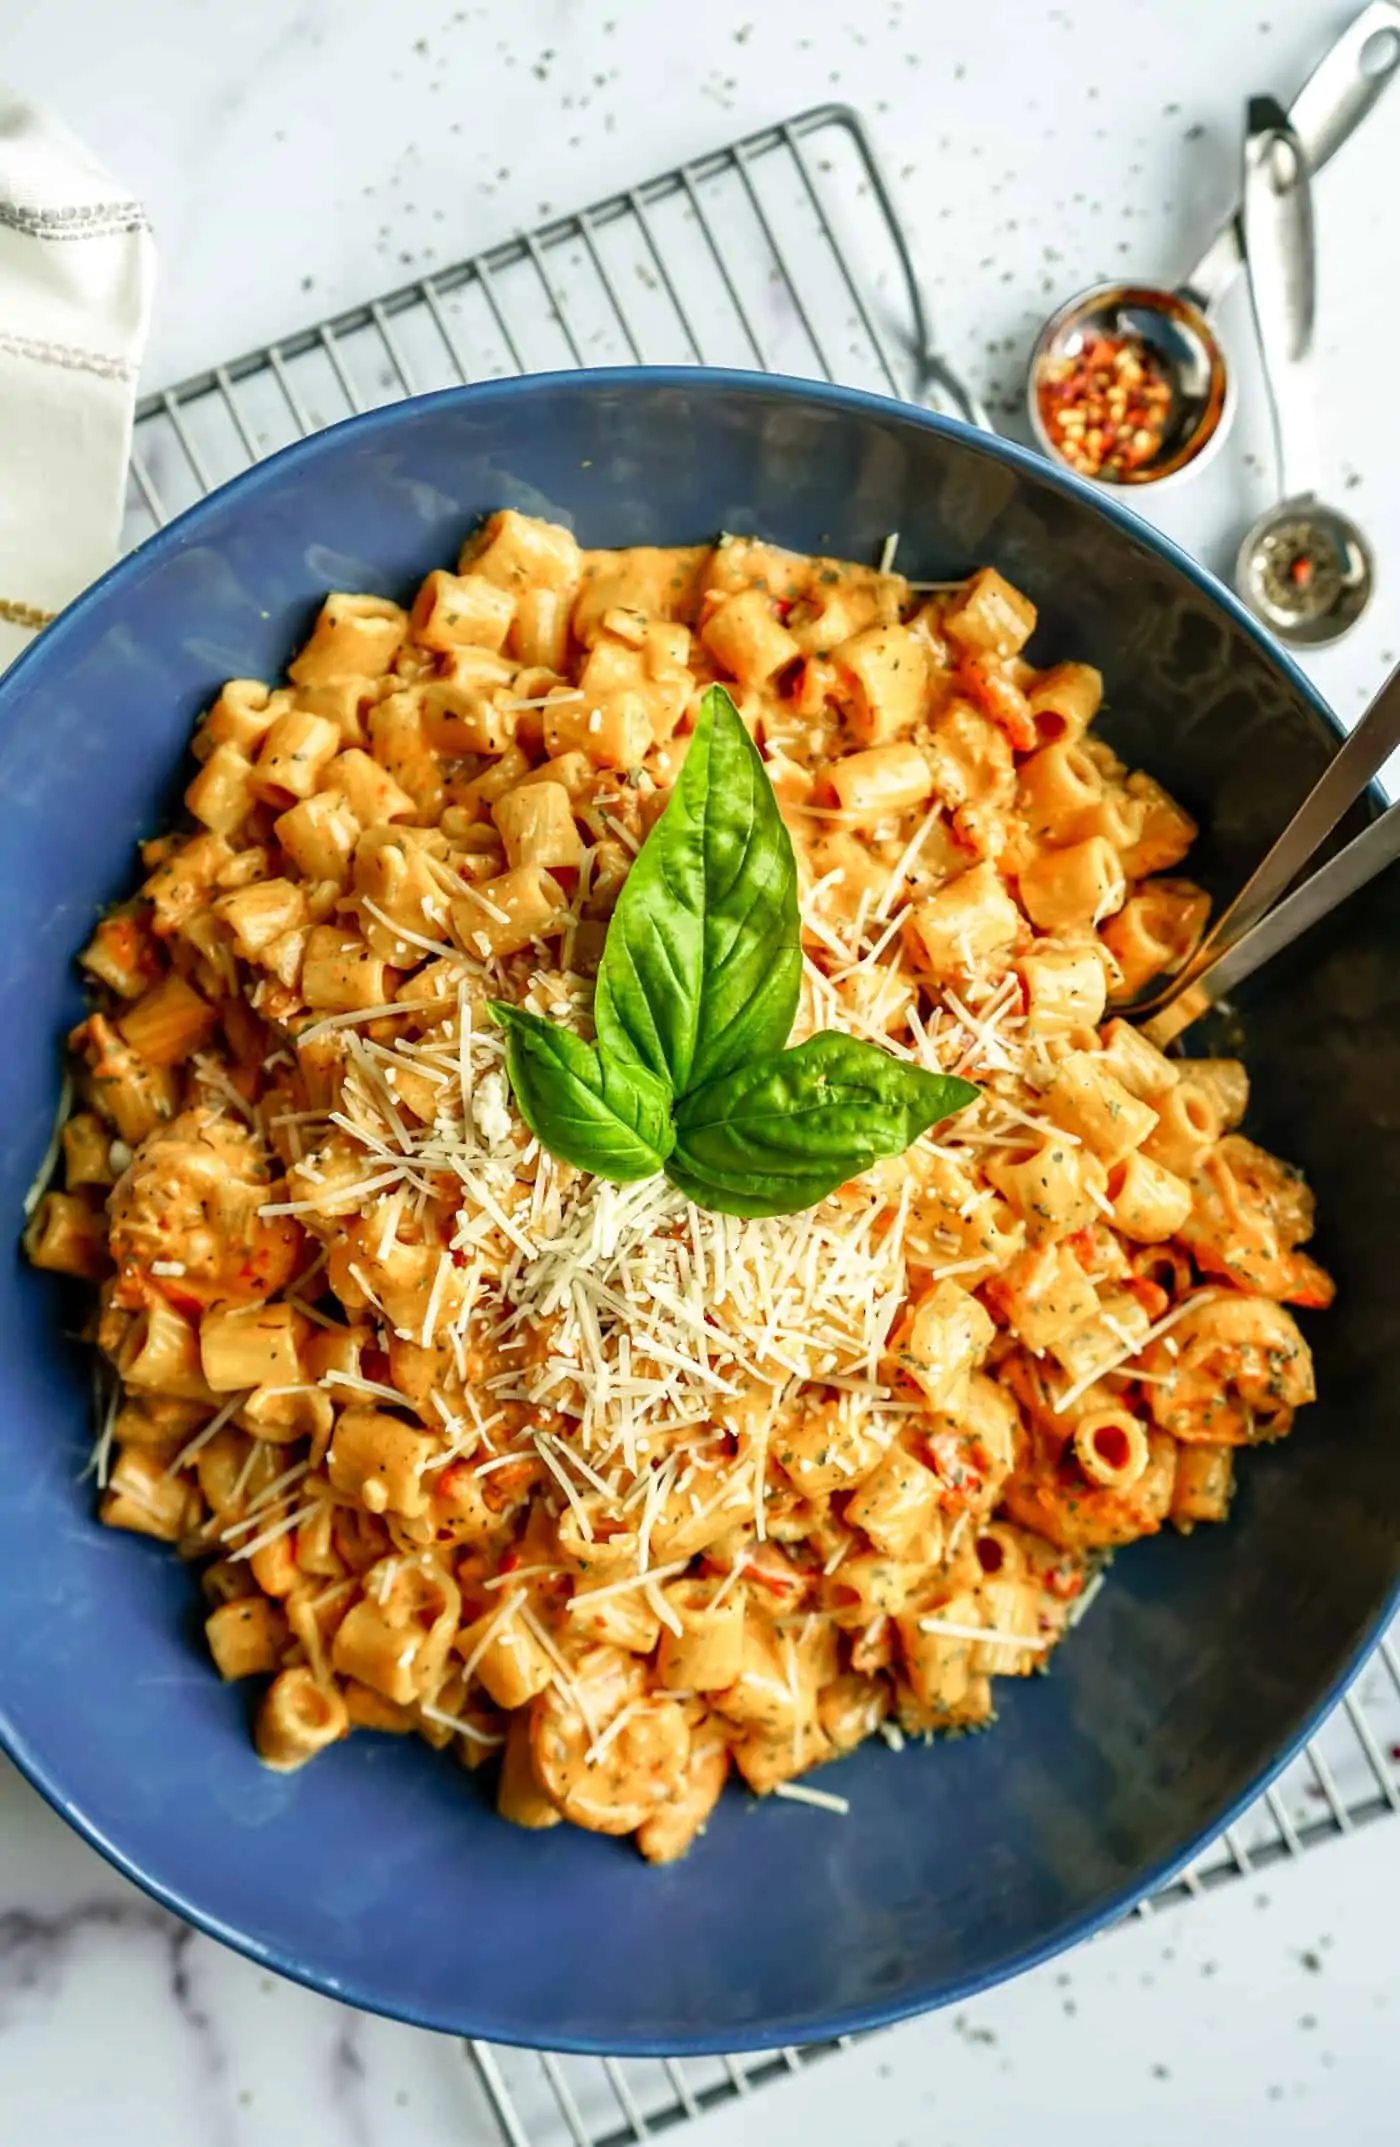 A Lily Love Affair shares and easy and delicious Instant Pot Creamy Cajun Pasta recipe.